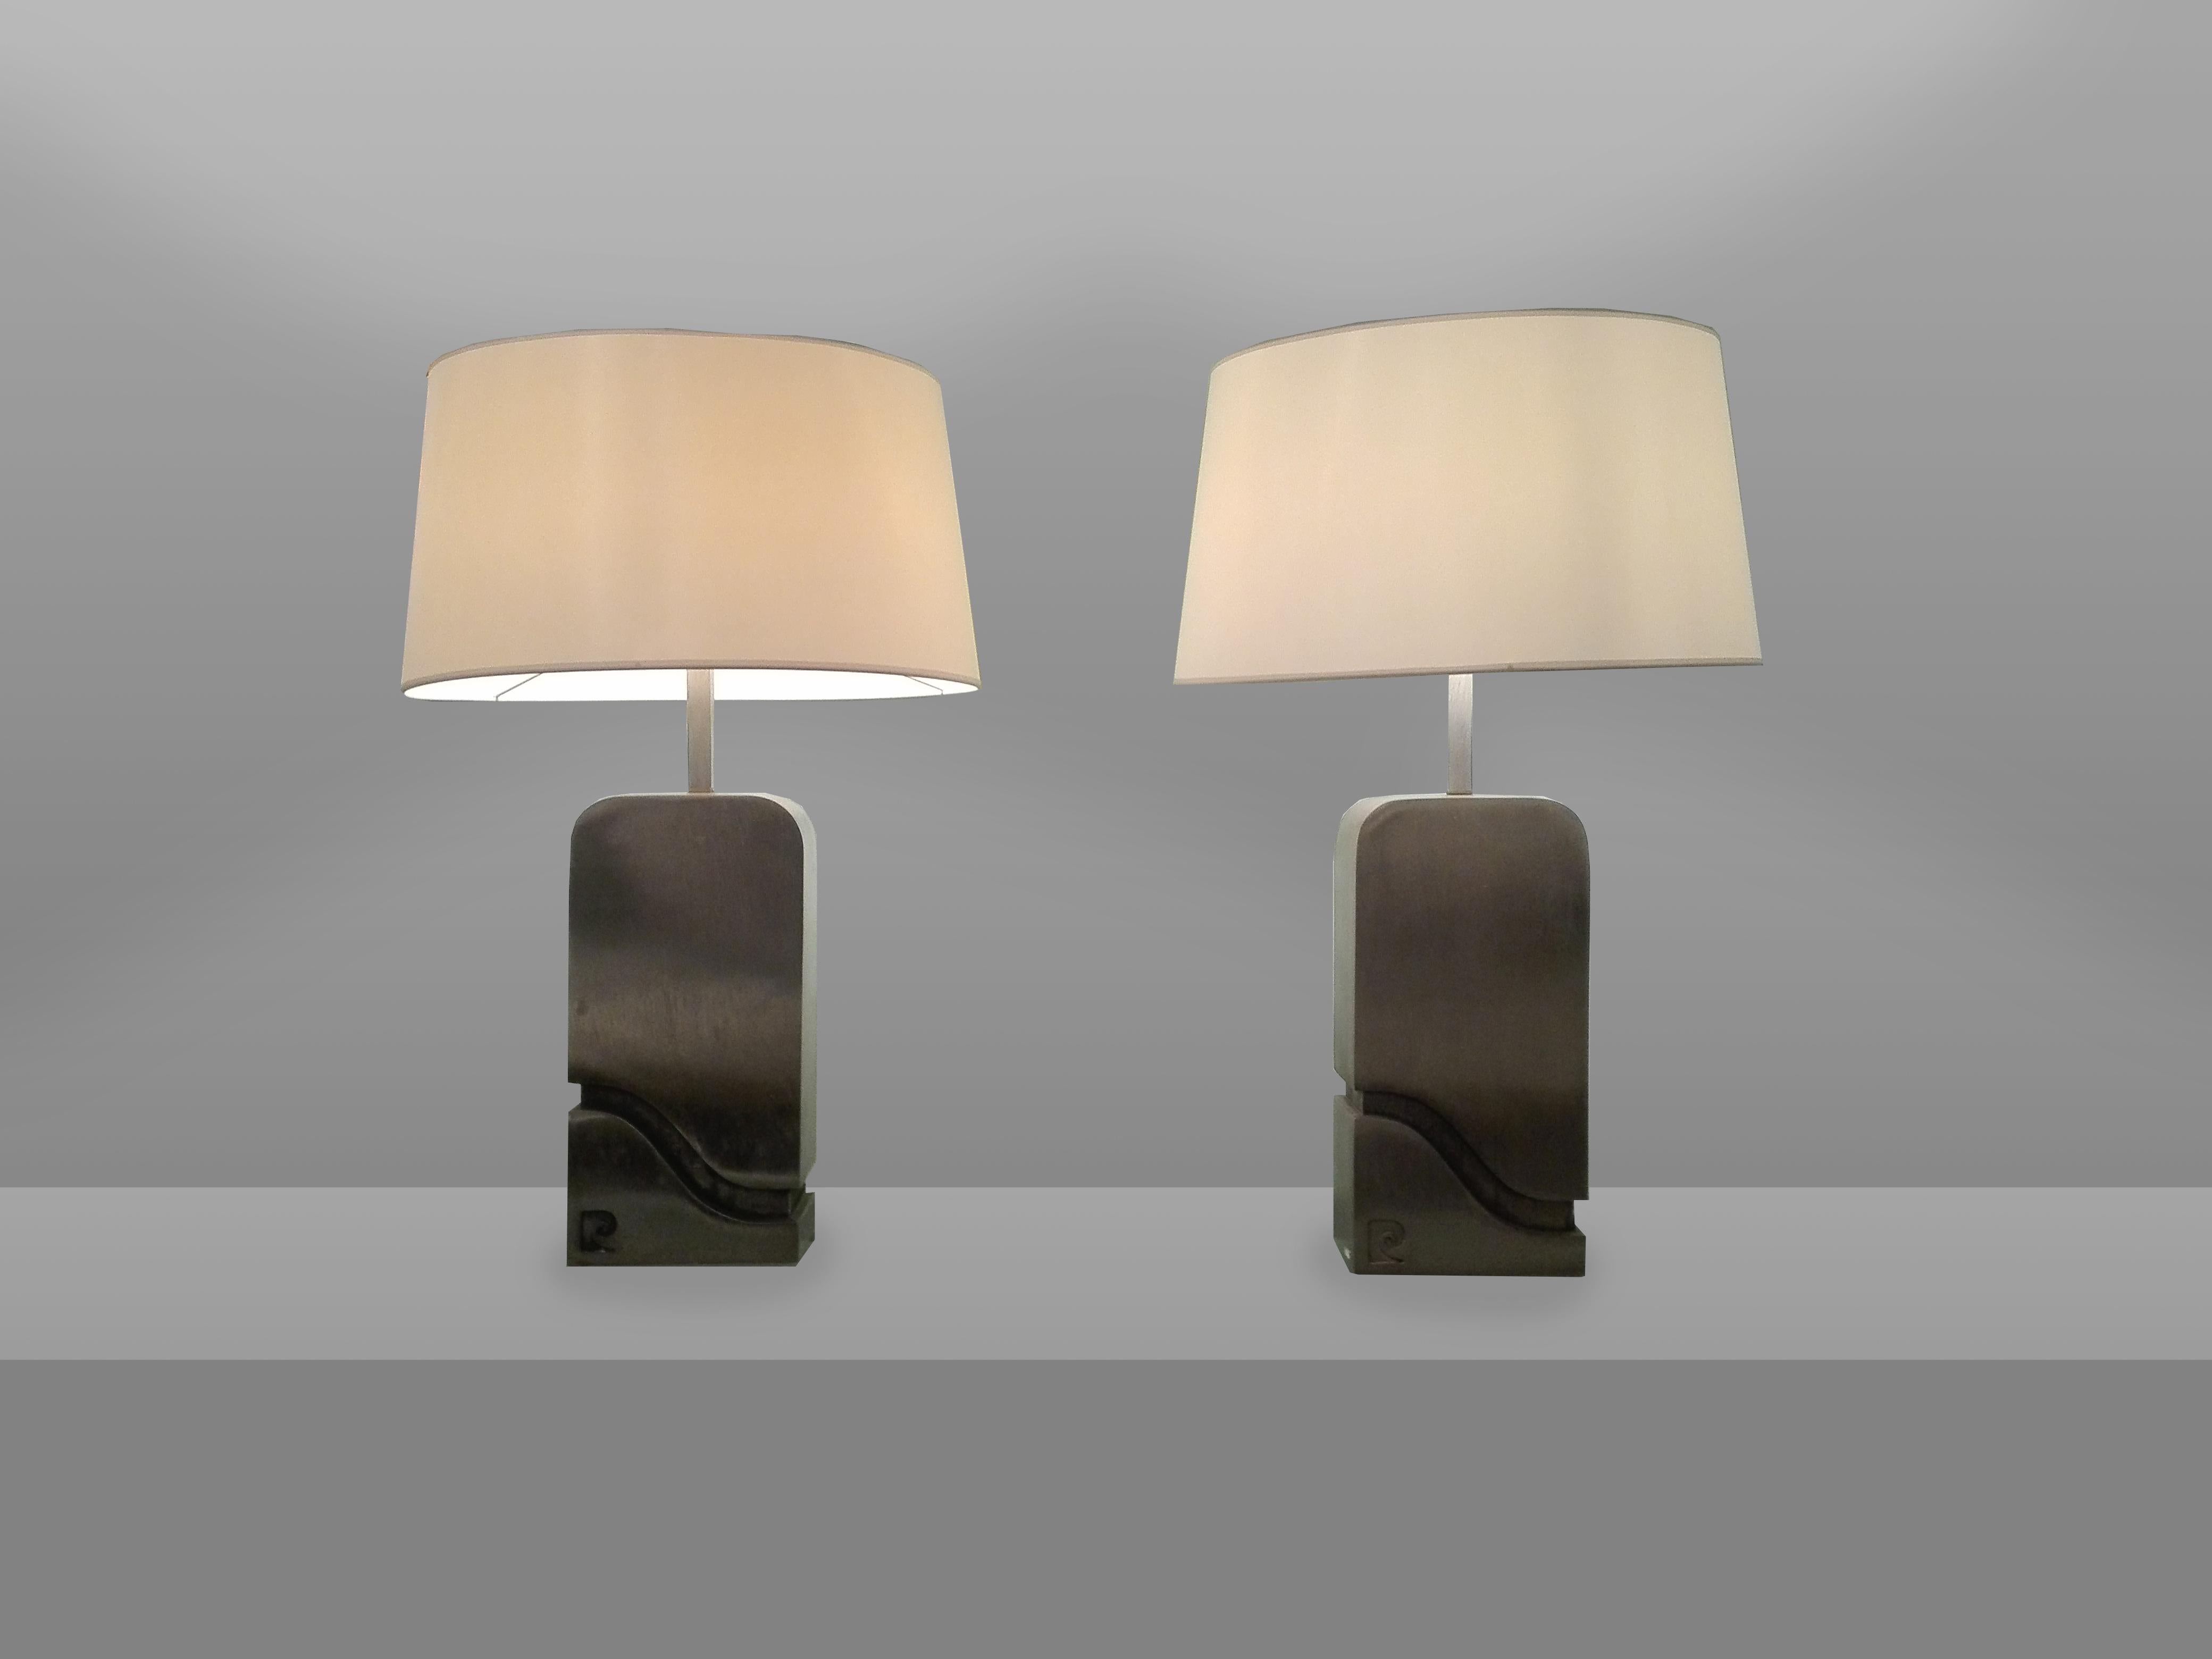 Pair of metal table lamps by Pierre Cardin, France, circa 1970. Dimensions: Diameter 46 cm, high 71 cm. Signed in the base.